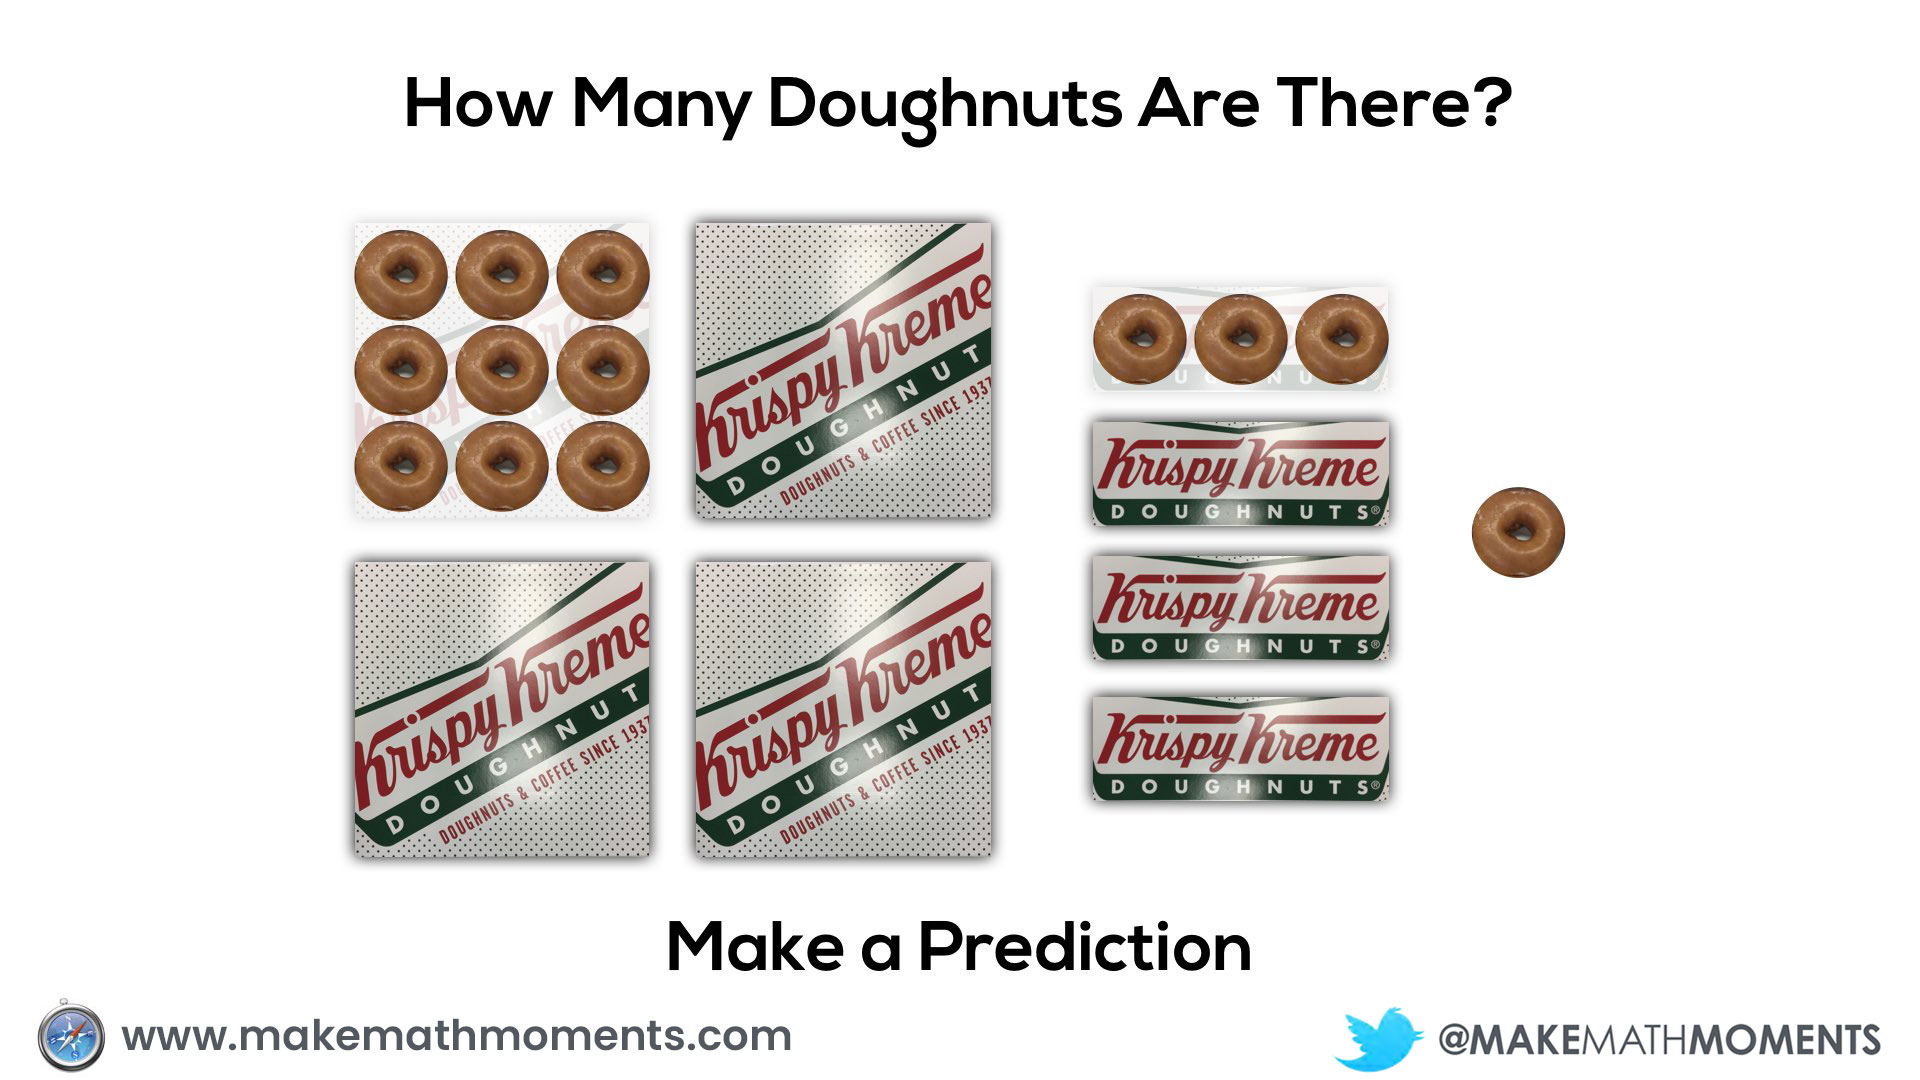 Showing how many doughnuts in each box